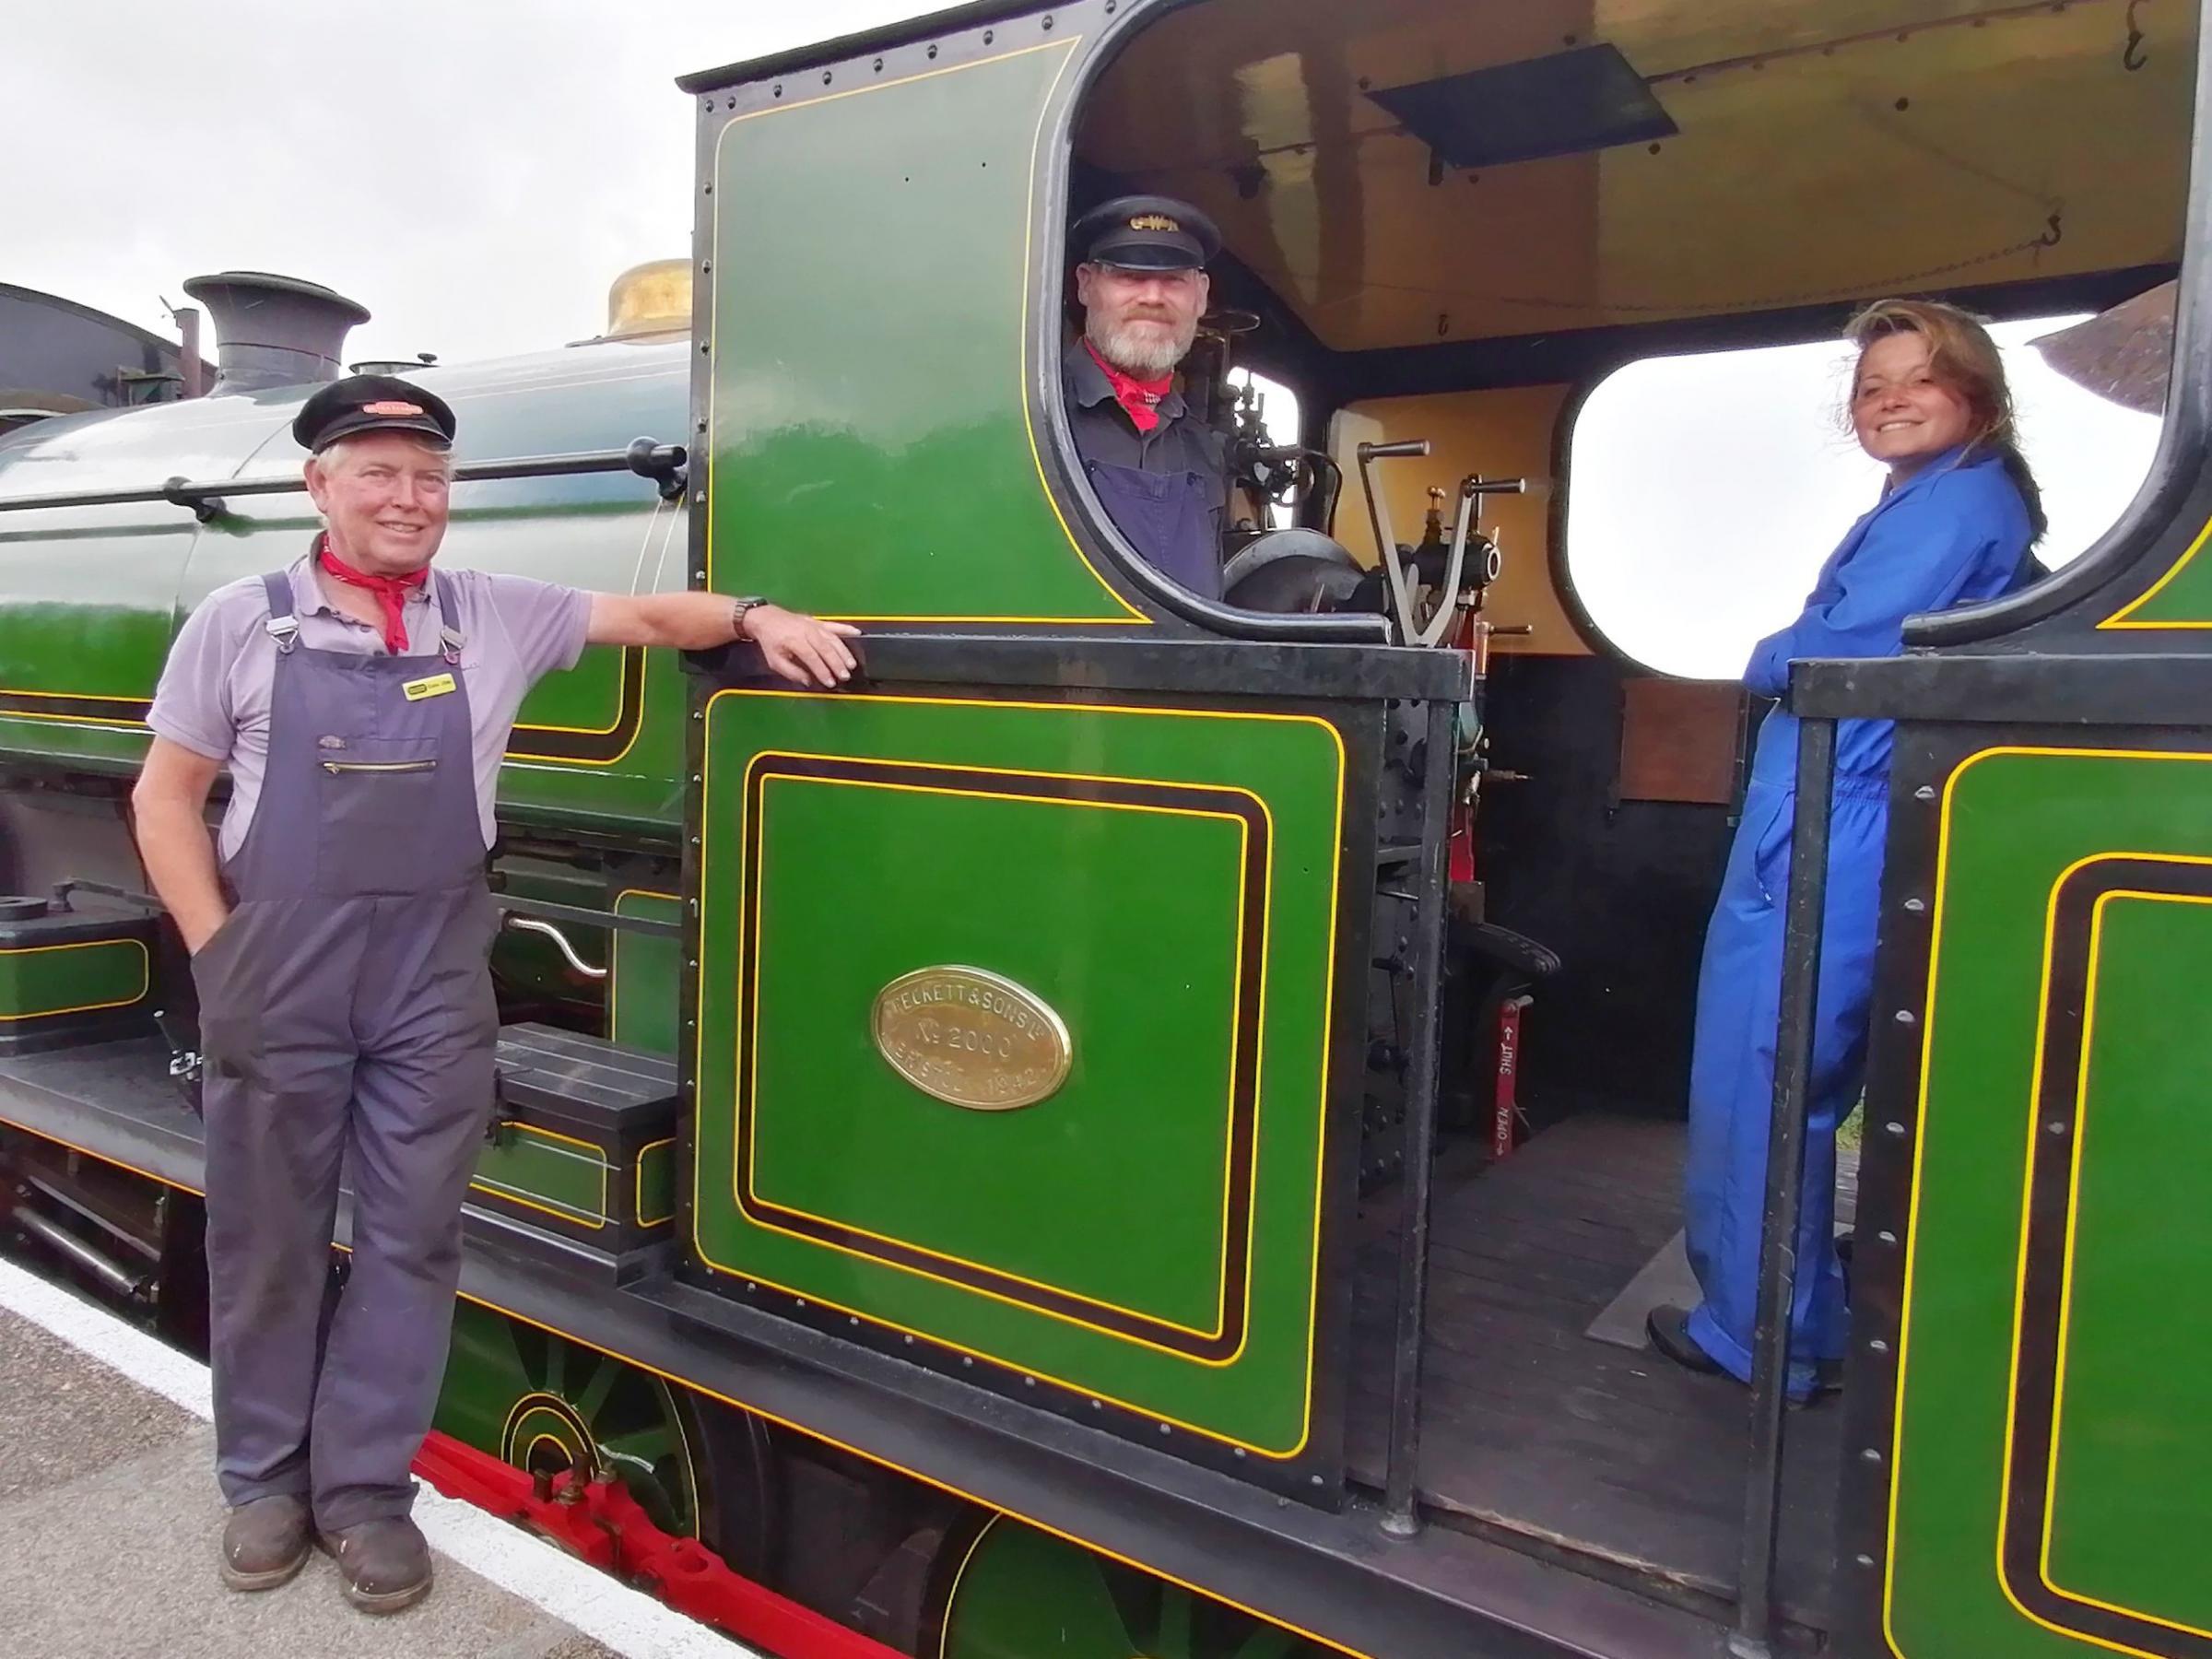 Colin Savage, Marcus Laugher and Sarah Norris onboard the steam locomotive Peckett 2000